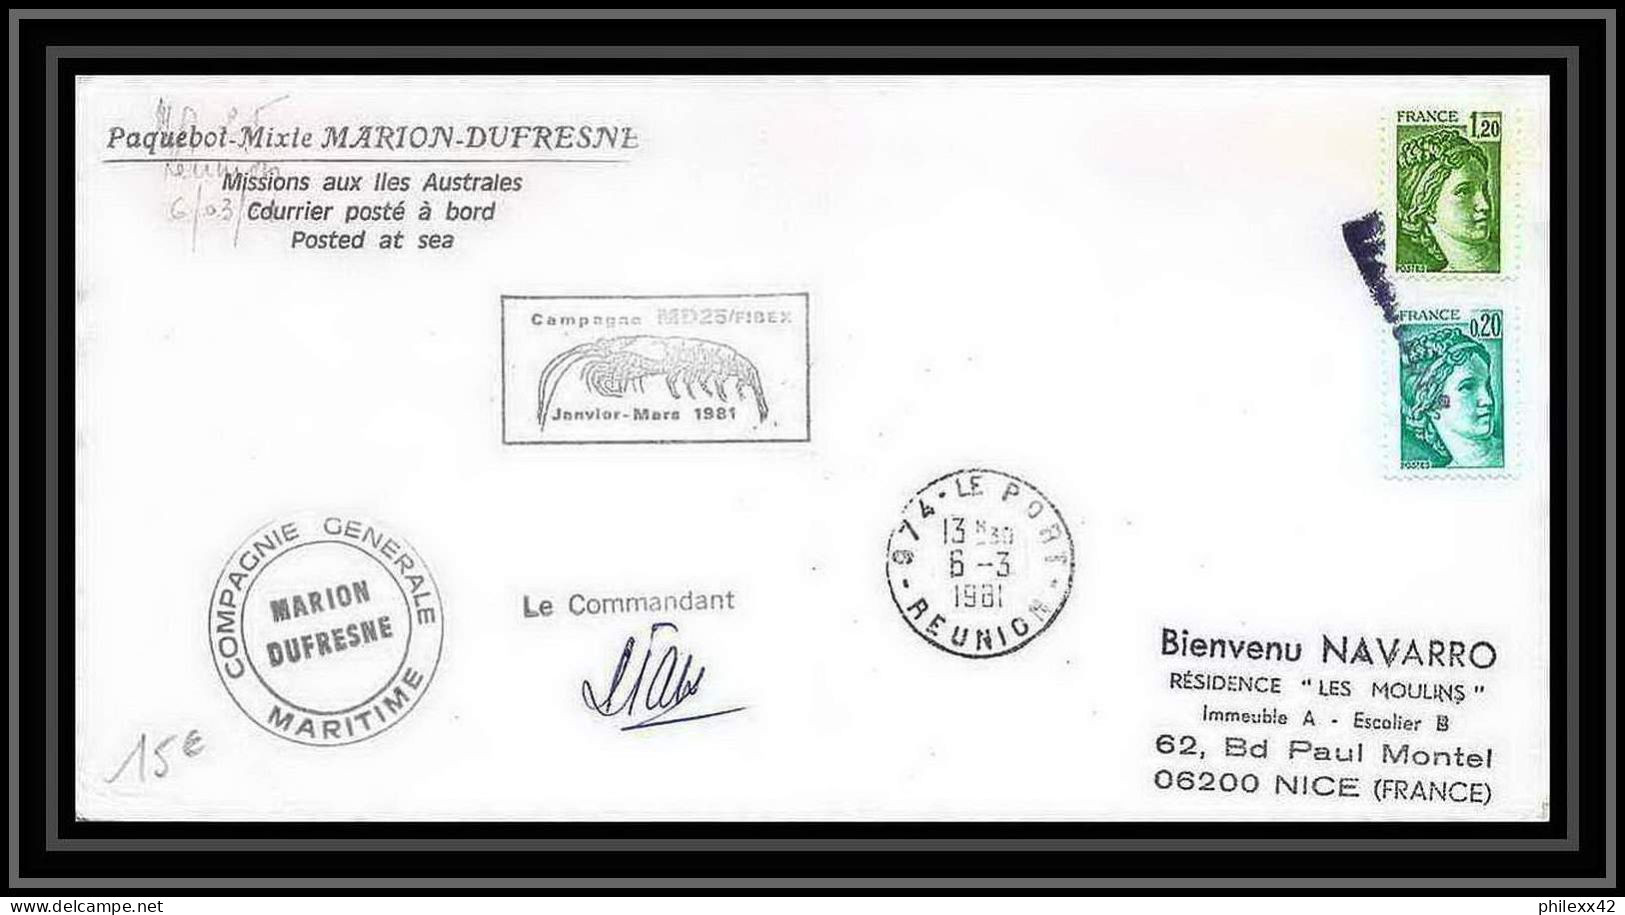 1210 Paquebot Marion Dufresne Md25 Fibex 6/3/1981 TAAF Antarctic Terres Australes Lettre (cover) Signé Signed - Covers & Documents